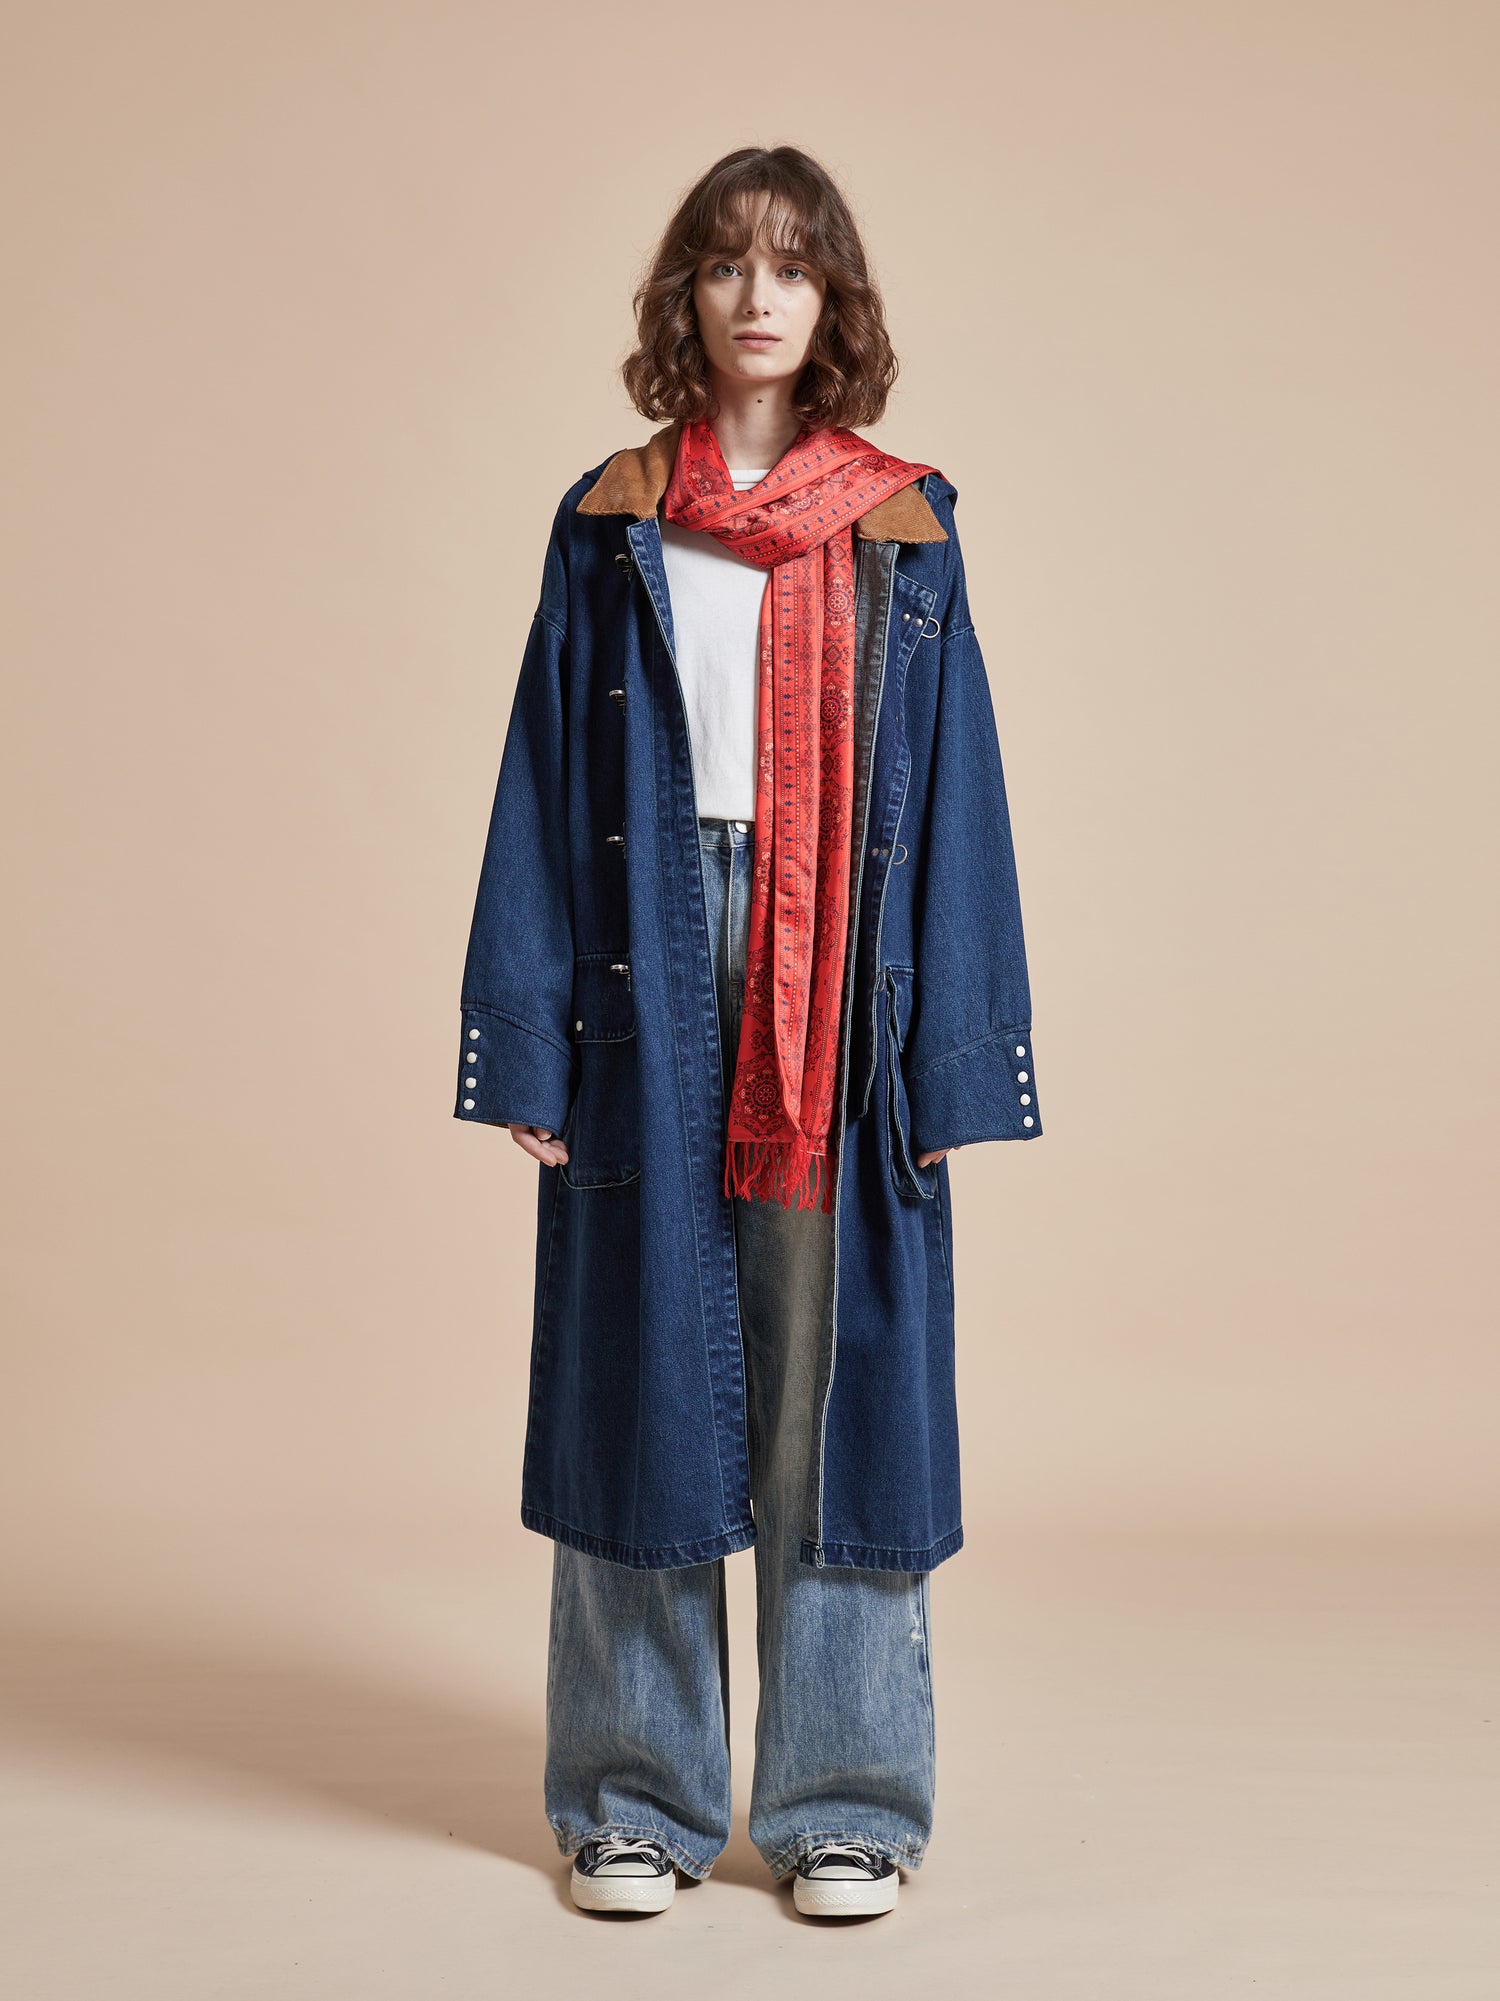 A woman wearing a Sargasso Denim Buckle Coat from Found and a red scarf.